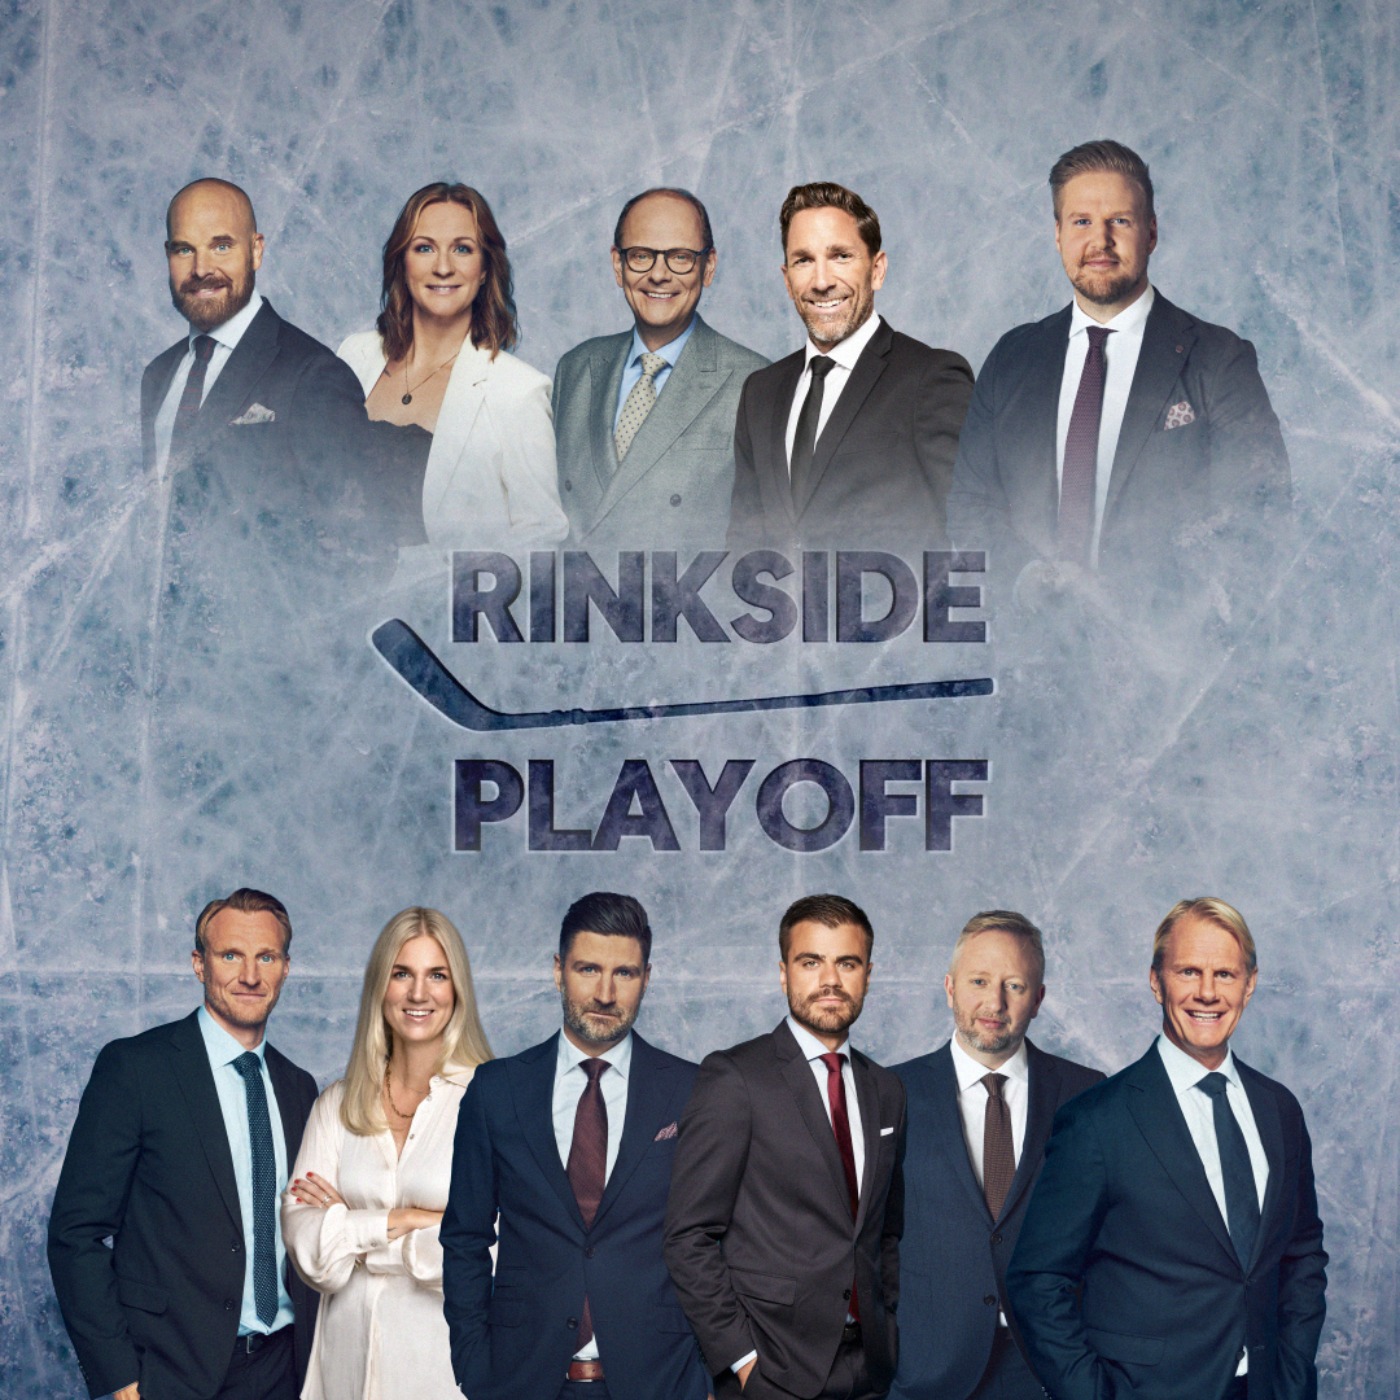 Rinkside Playoff - DRINK the water